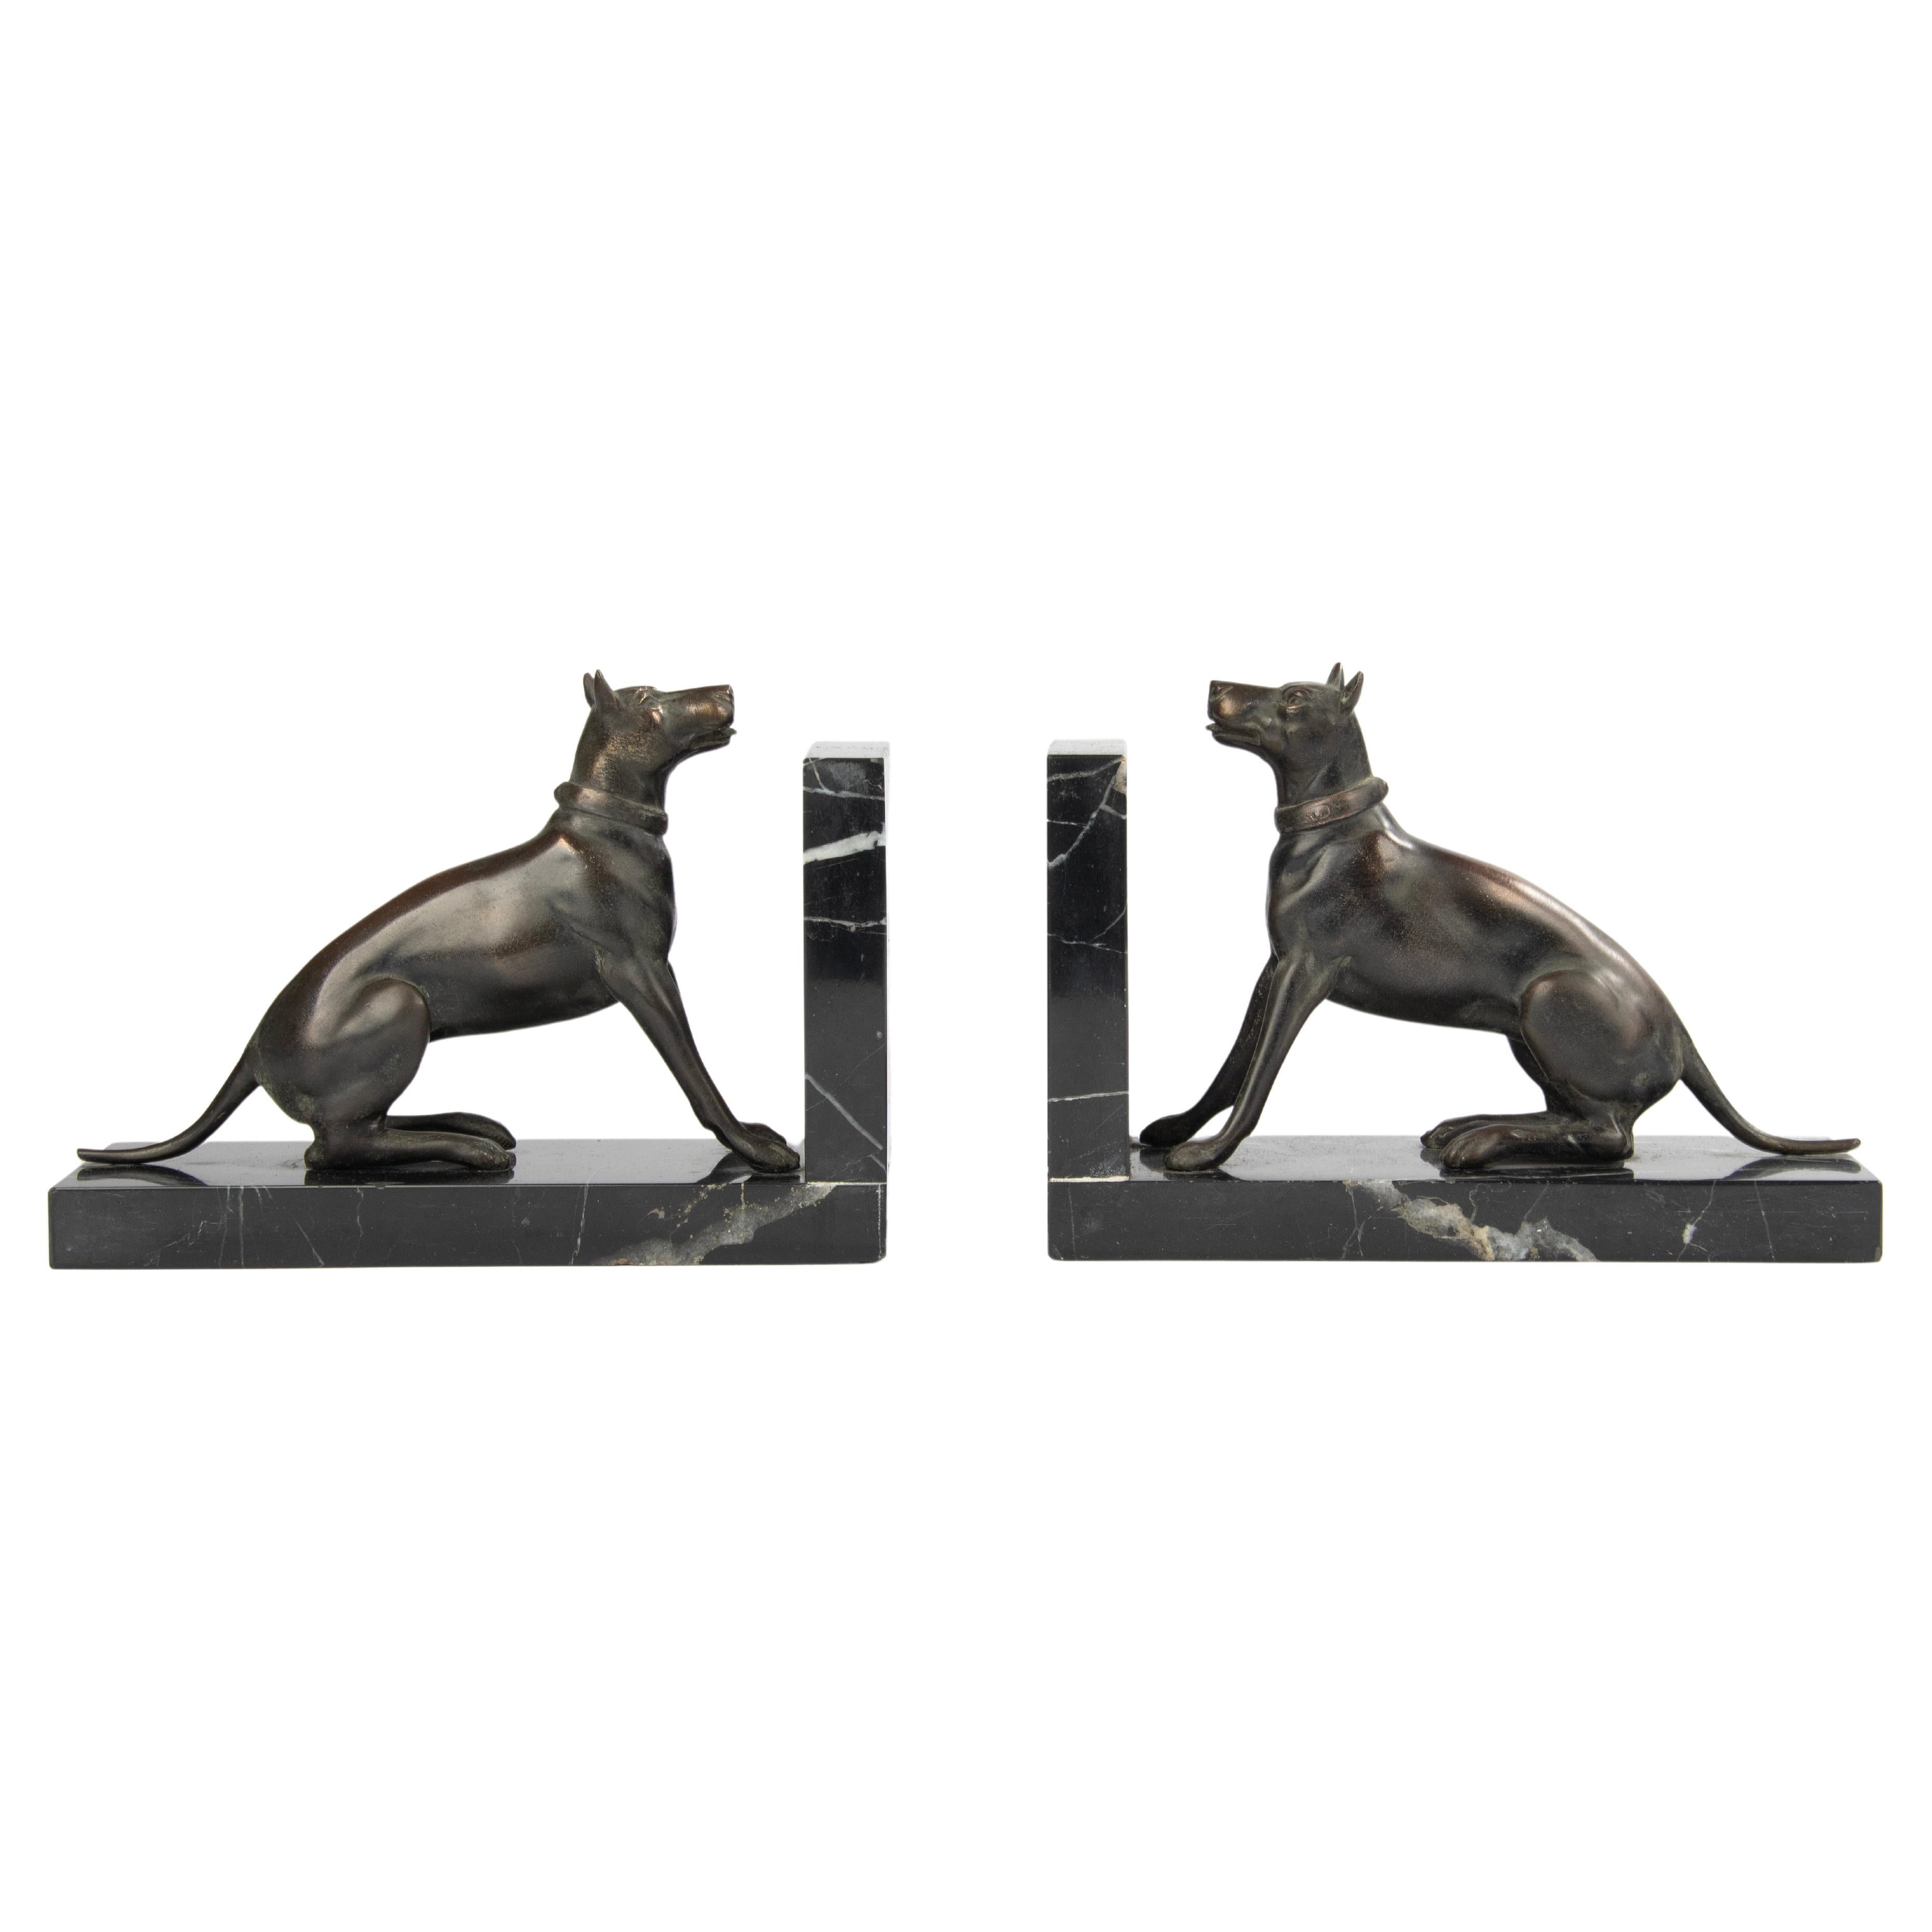 Early 20th Century Patinated Spelter and Marble Bookends with Danish Dogs For Sale